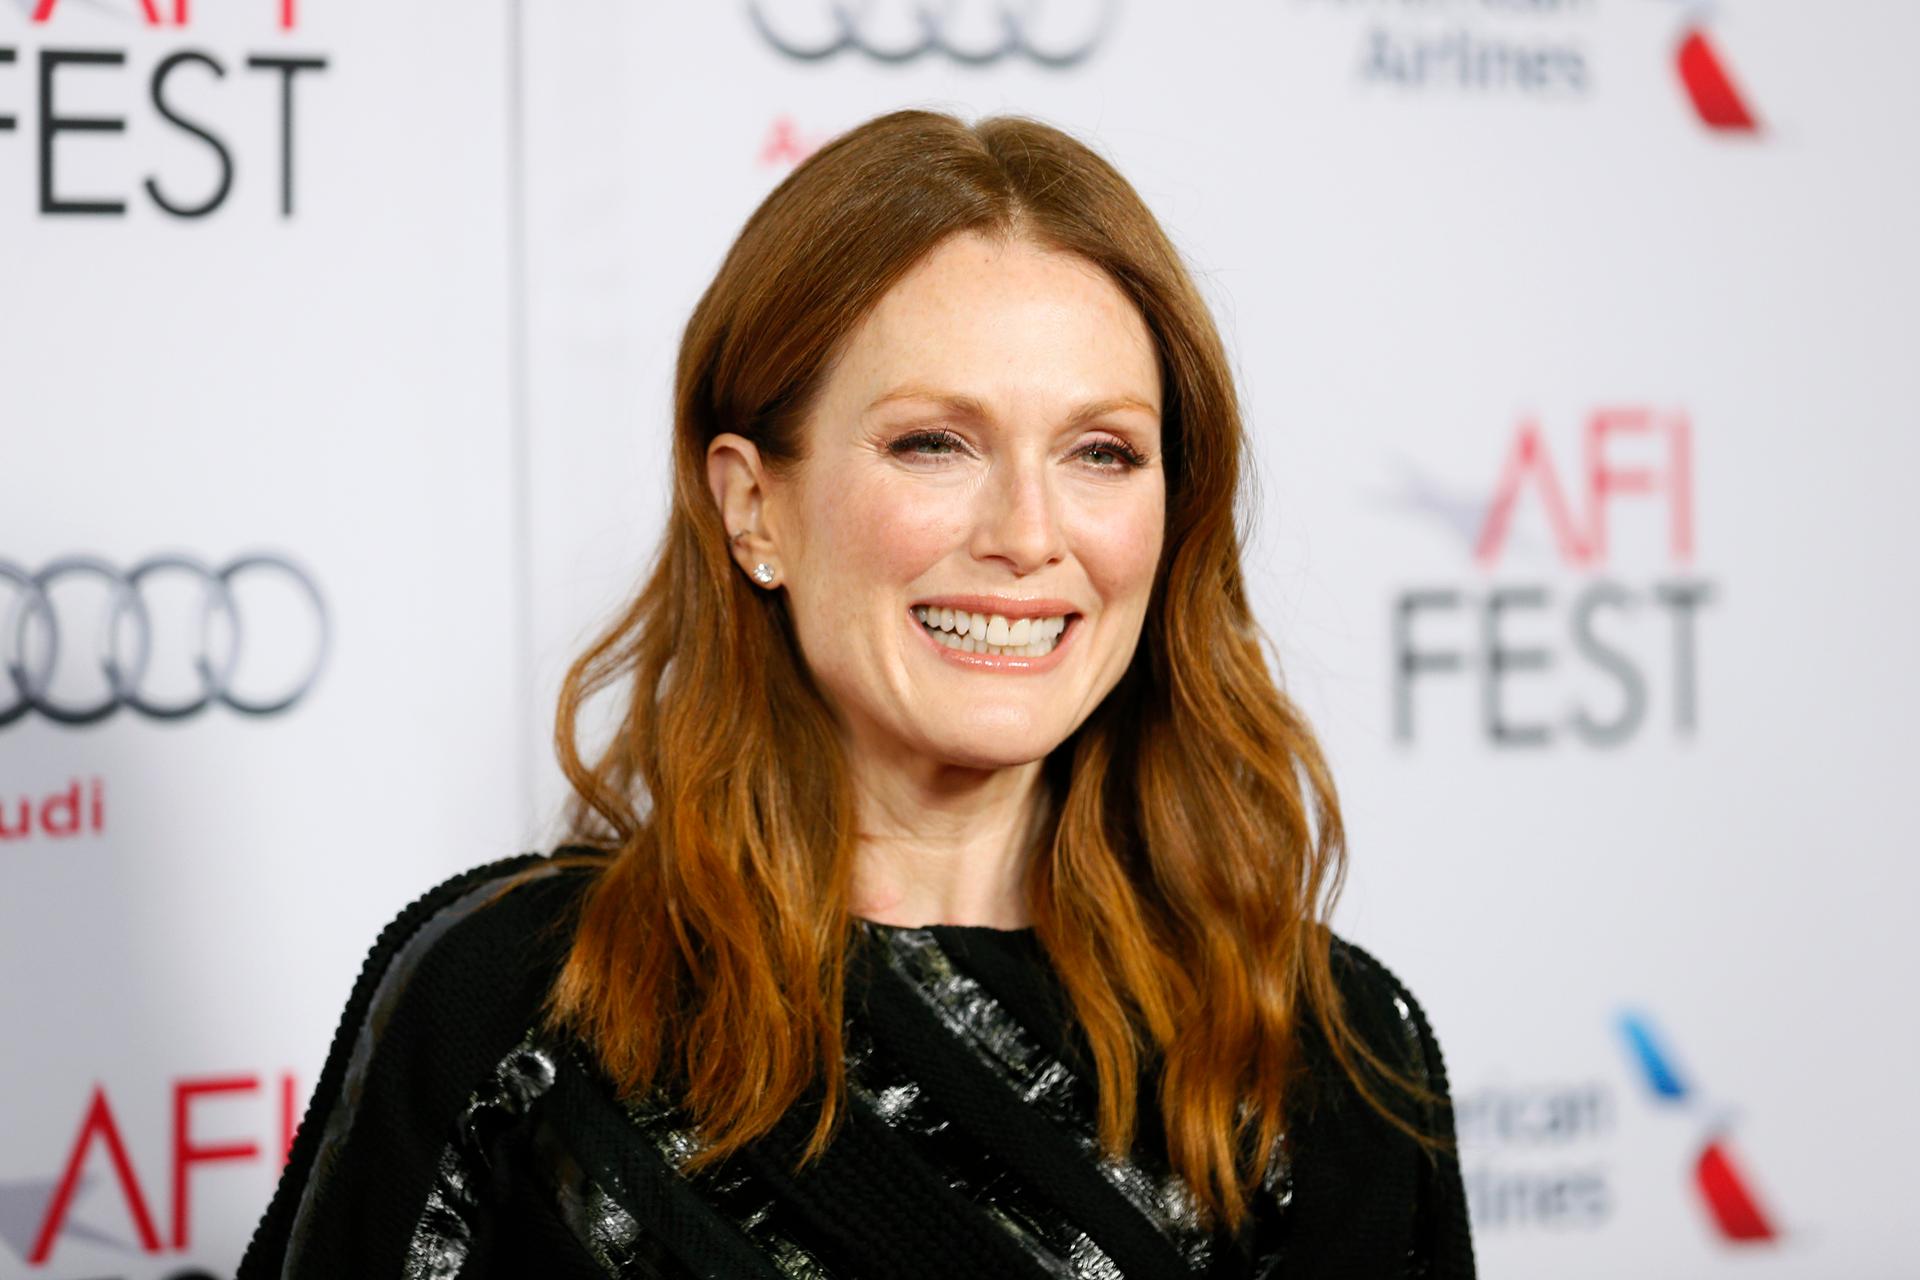 Cast member Julianne Moore poses at a special screening of the film "Still Alice" during AFI Fest 2014 in Hollywood on November 12, 2014. 